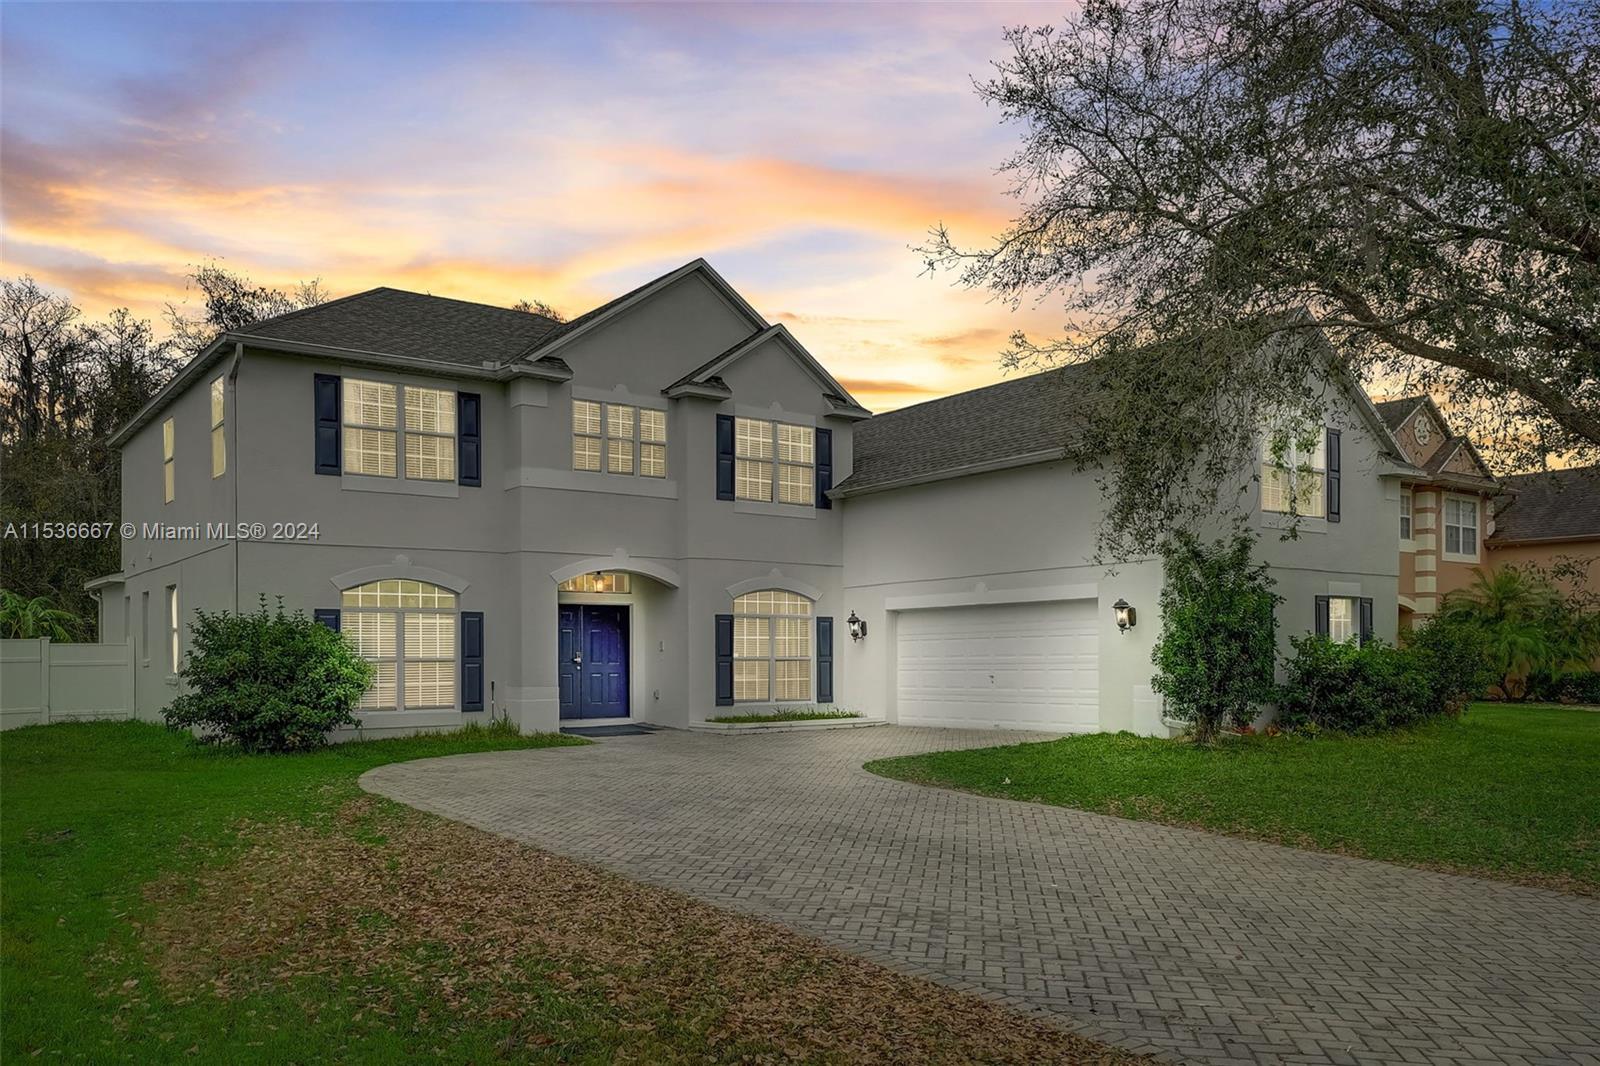 3209 Eagle Watch Dr, Kissimmee,  - 5 Bedrooms  
4 Bathrooms - 